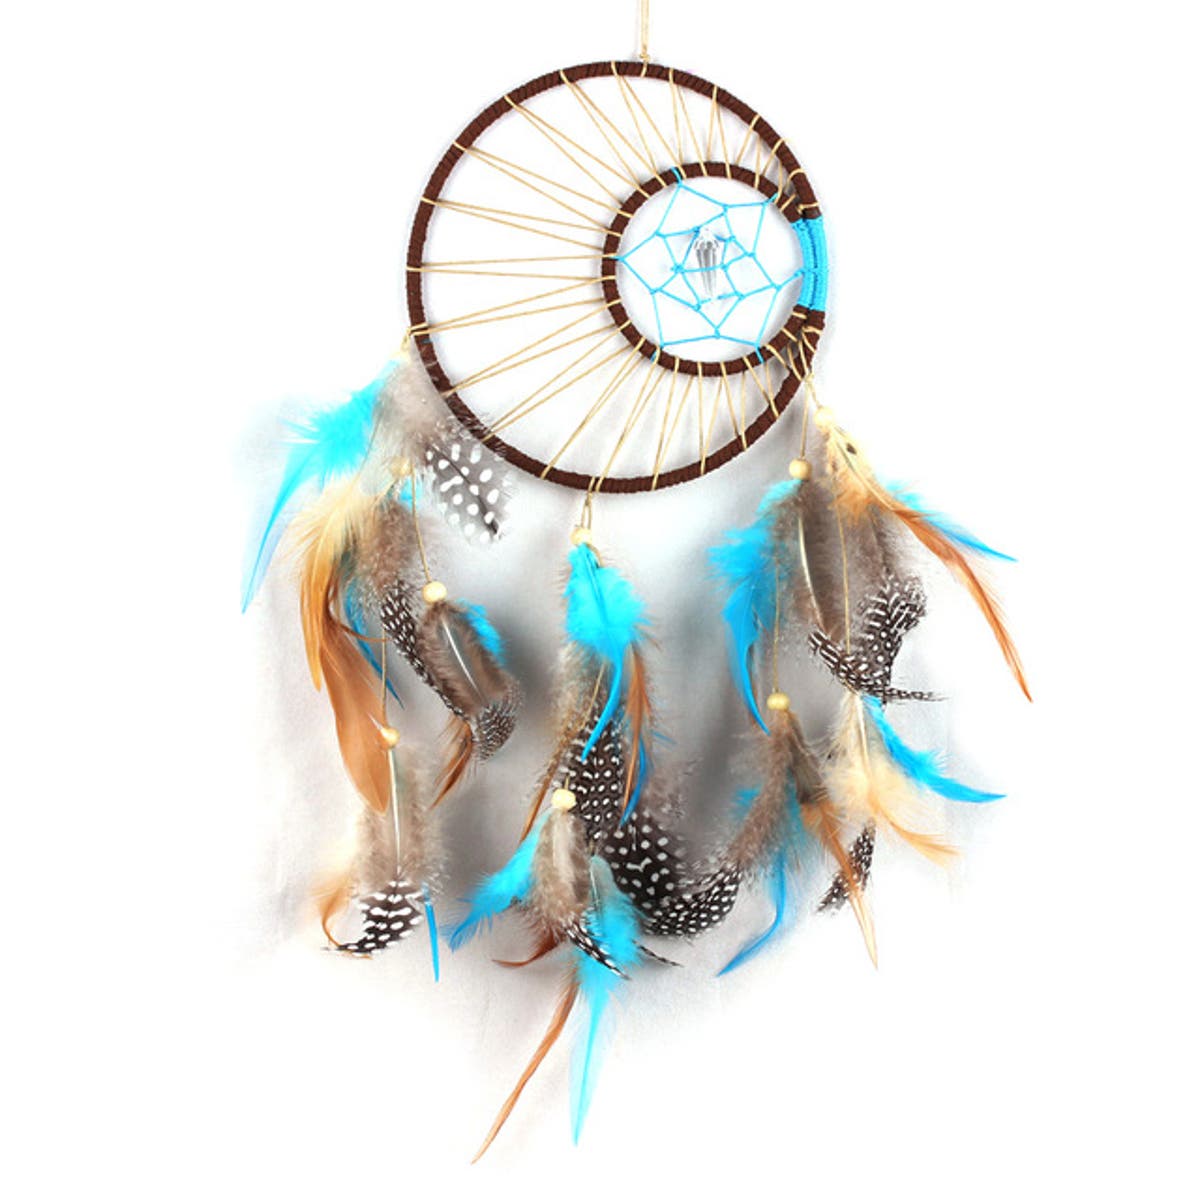 Dreamcatcher: Powerful Protective Amulet Of North American Indian People